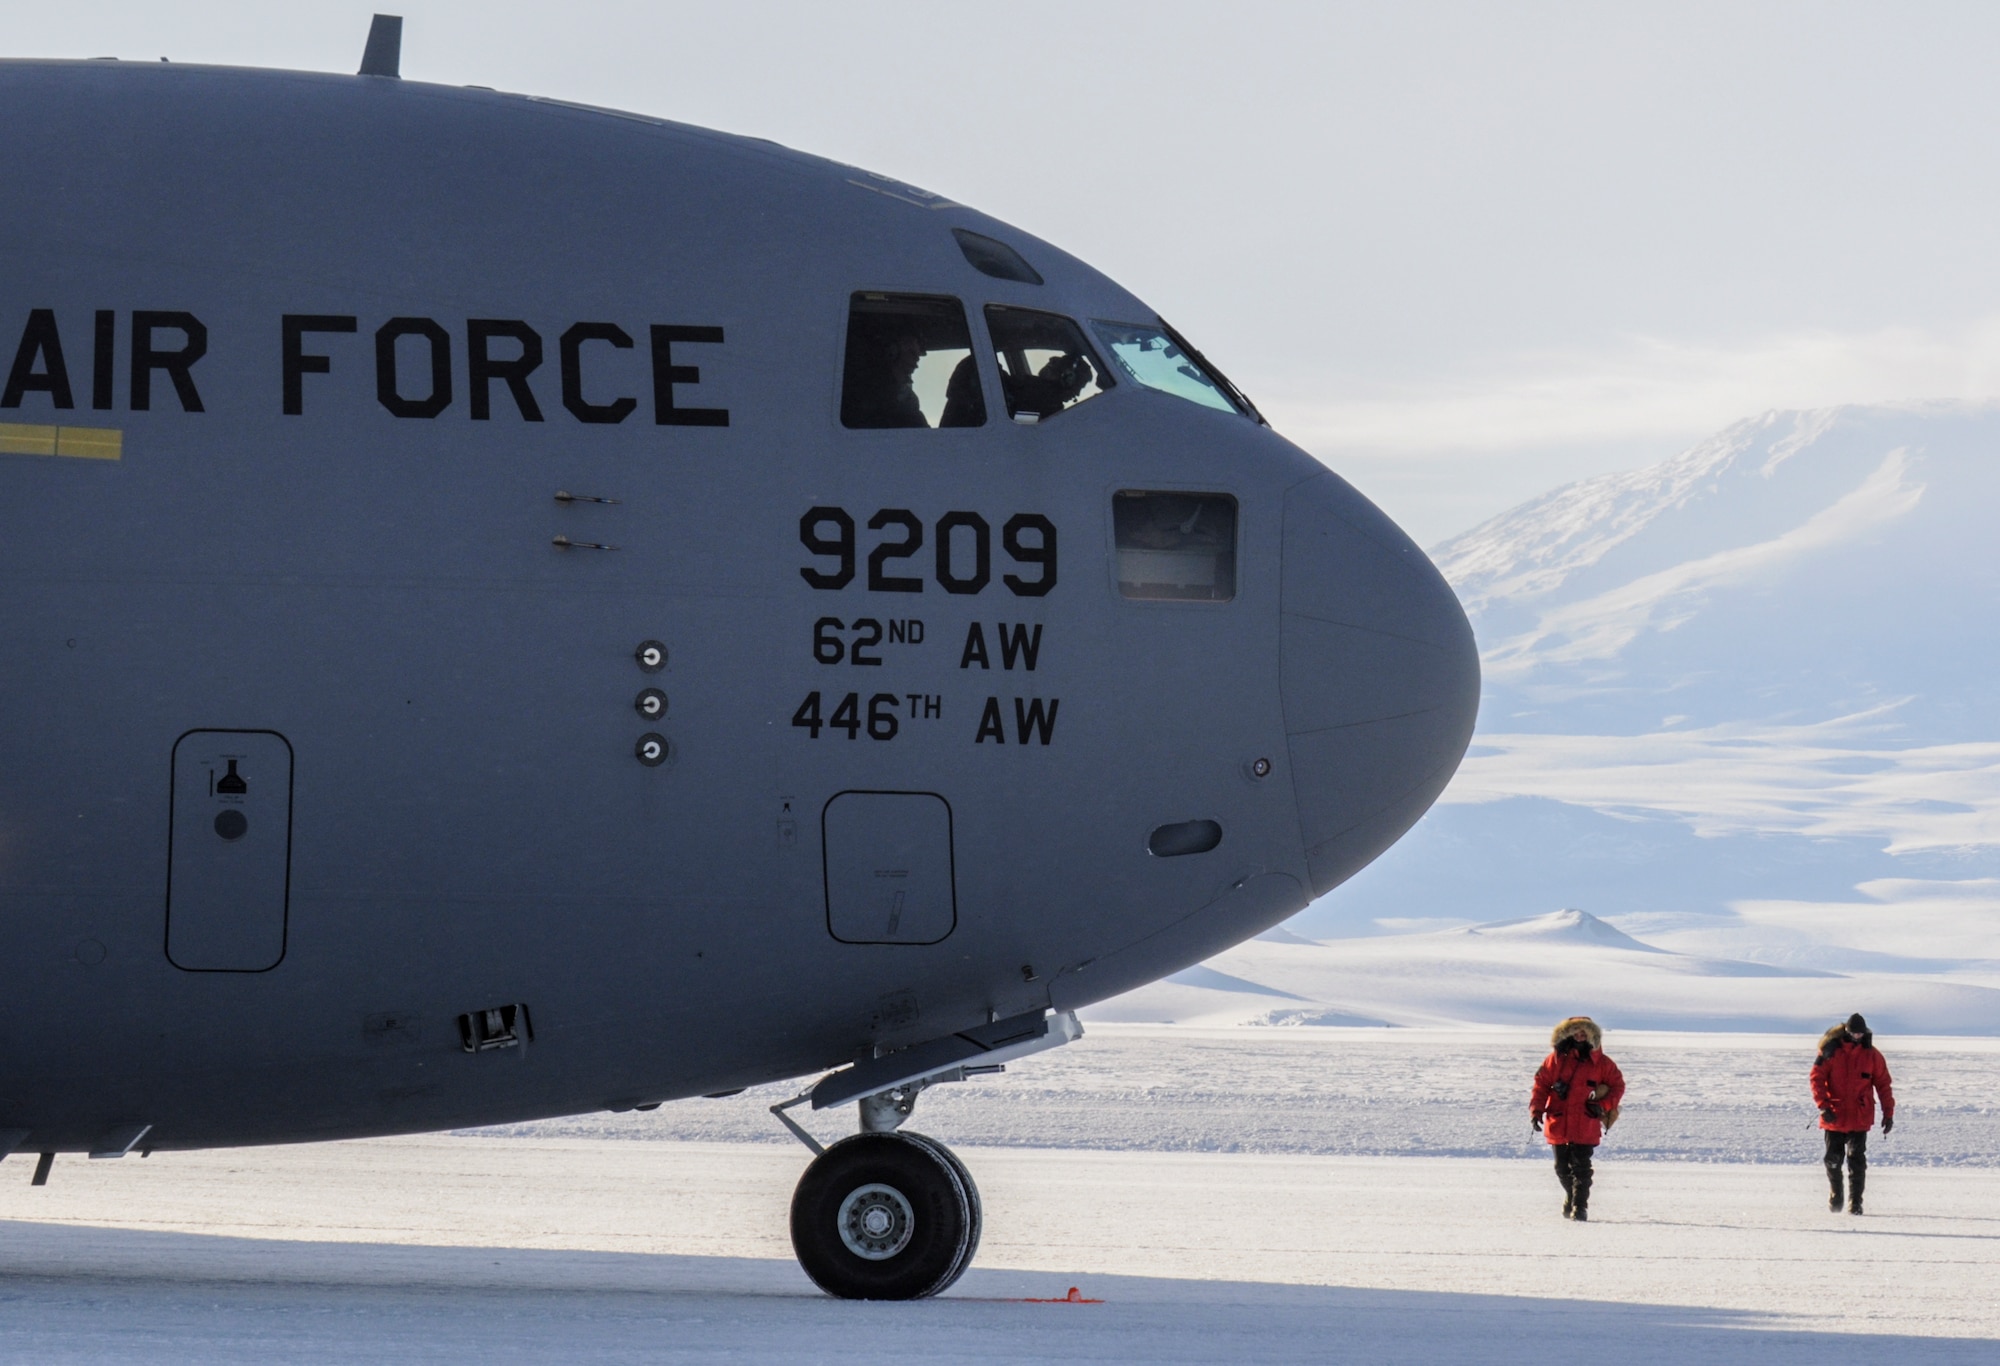 Staff Sgt. Shawn Pharr and Staff Sgt. Mathew Lee, 62nd Aircraft Maintenance Squadron flying crew chiefs, conduct an inspection of a C-17 Globemaster III aircraft, Oct. 1, 2012, on the seasonal ice runway outside of McMurdo Station, Antarctica. The crew chiefs wore Extremely Cold Weather gear to combat the chill of the minus 35 degree temperatures. (U.S. Air Force photo/Staff Sgt. Sean Tobin)